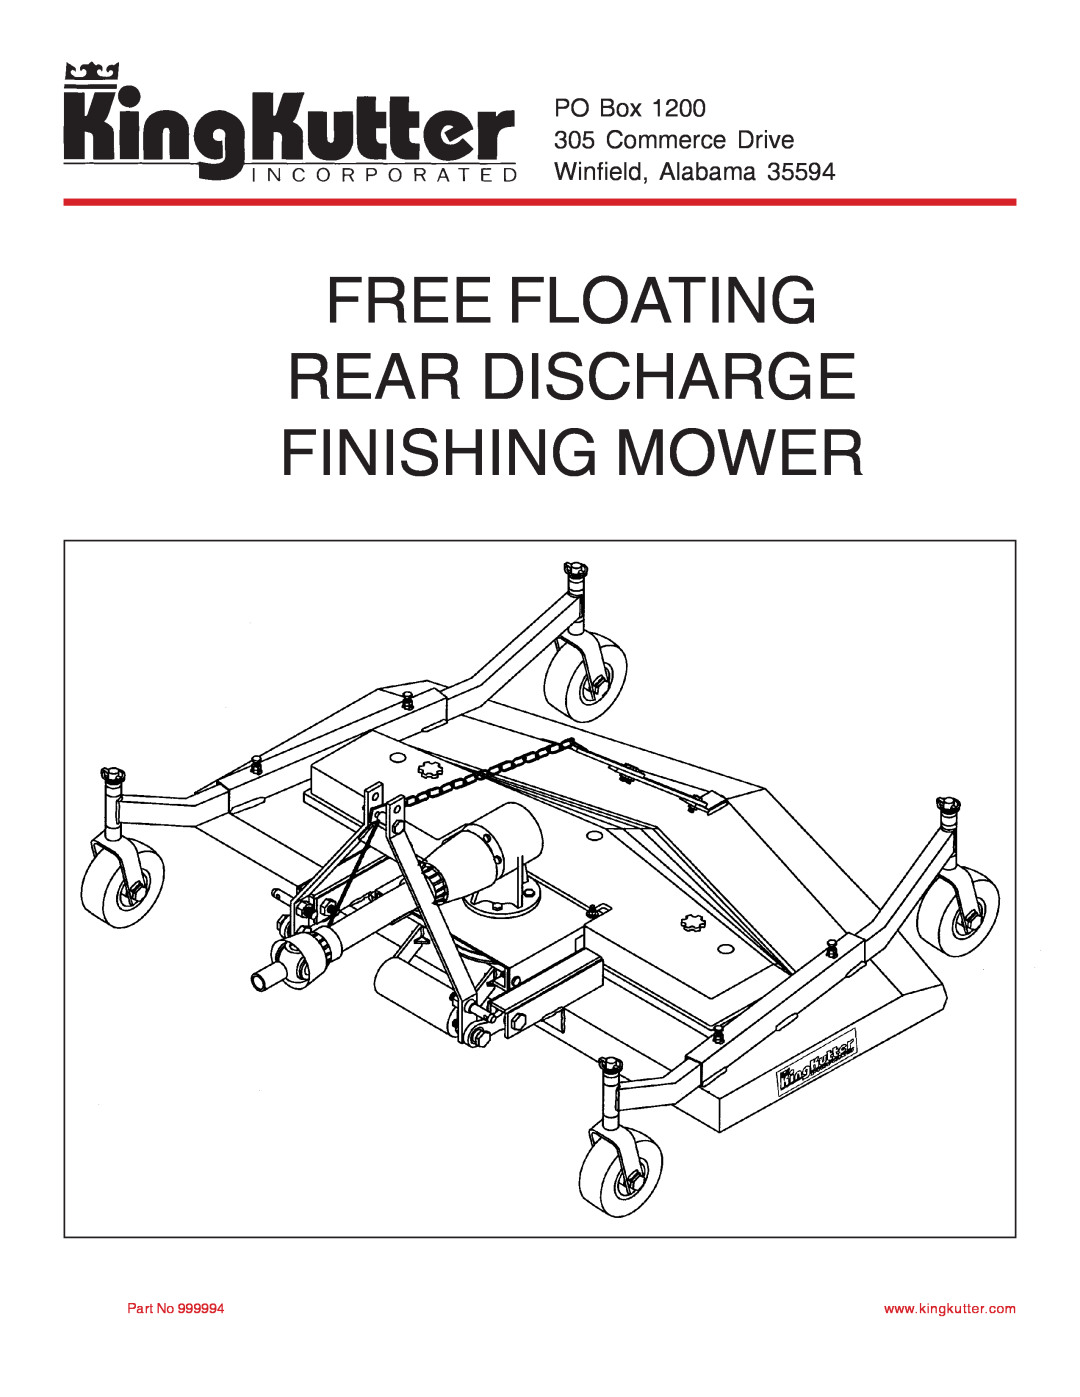 King Kutter manual Free Floating Rear Discharge Finishing Mower, PO Box 305 Commerce Drive Winfield, Alabama 